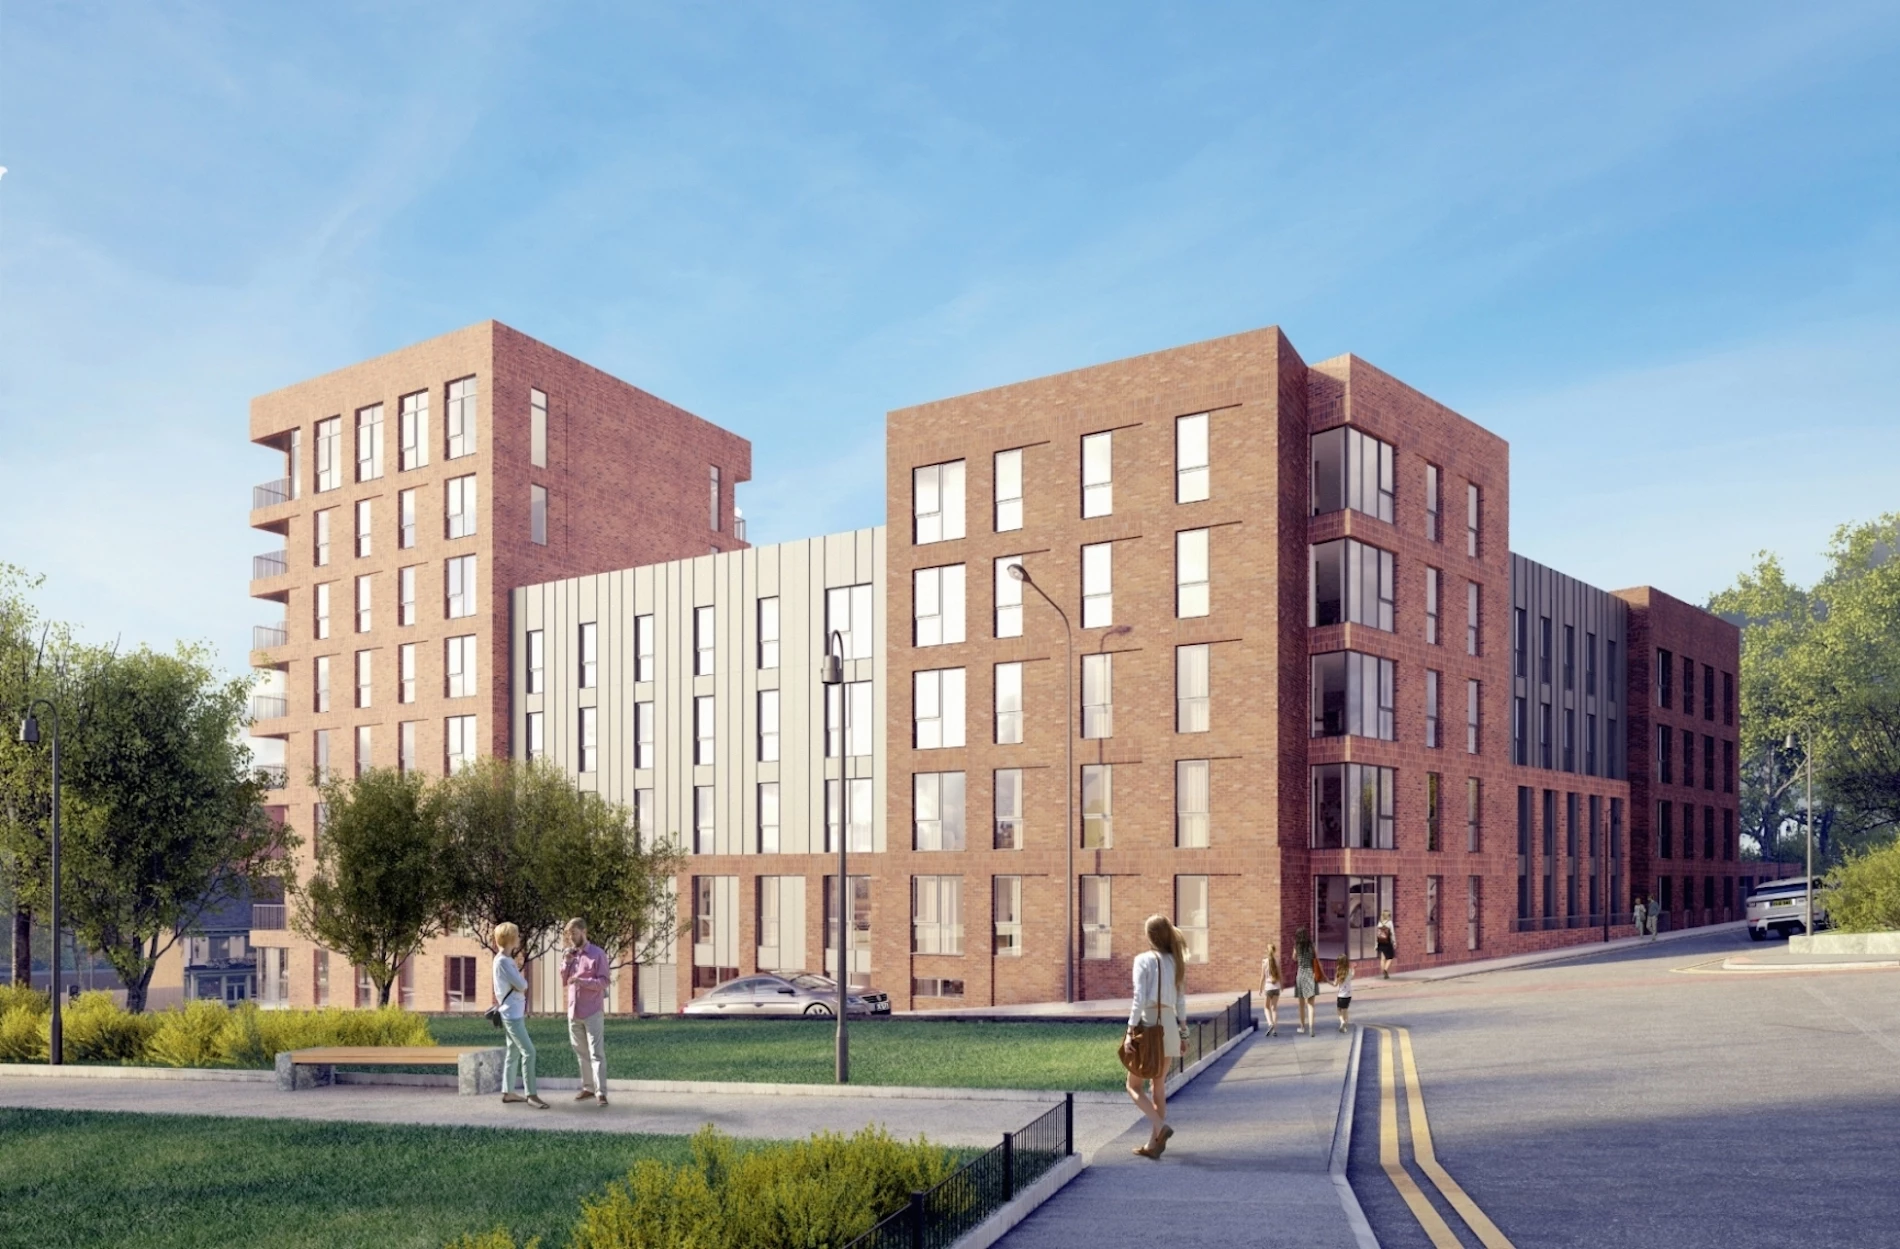 The £19 million scheme of 131 apartments is called Great Central. 